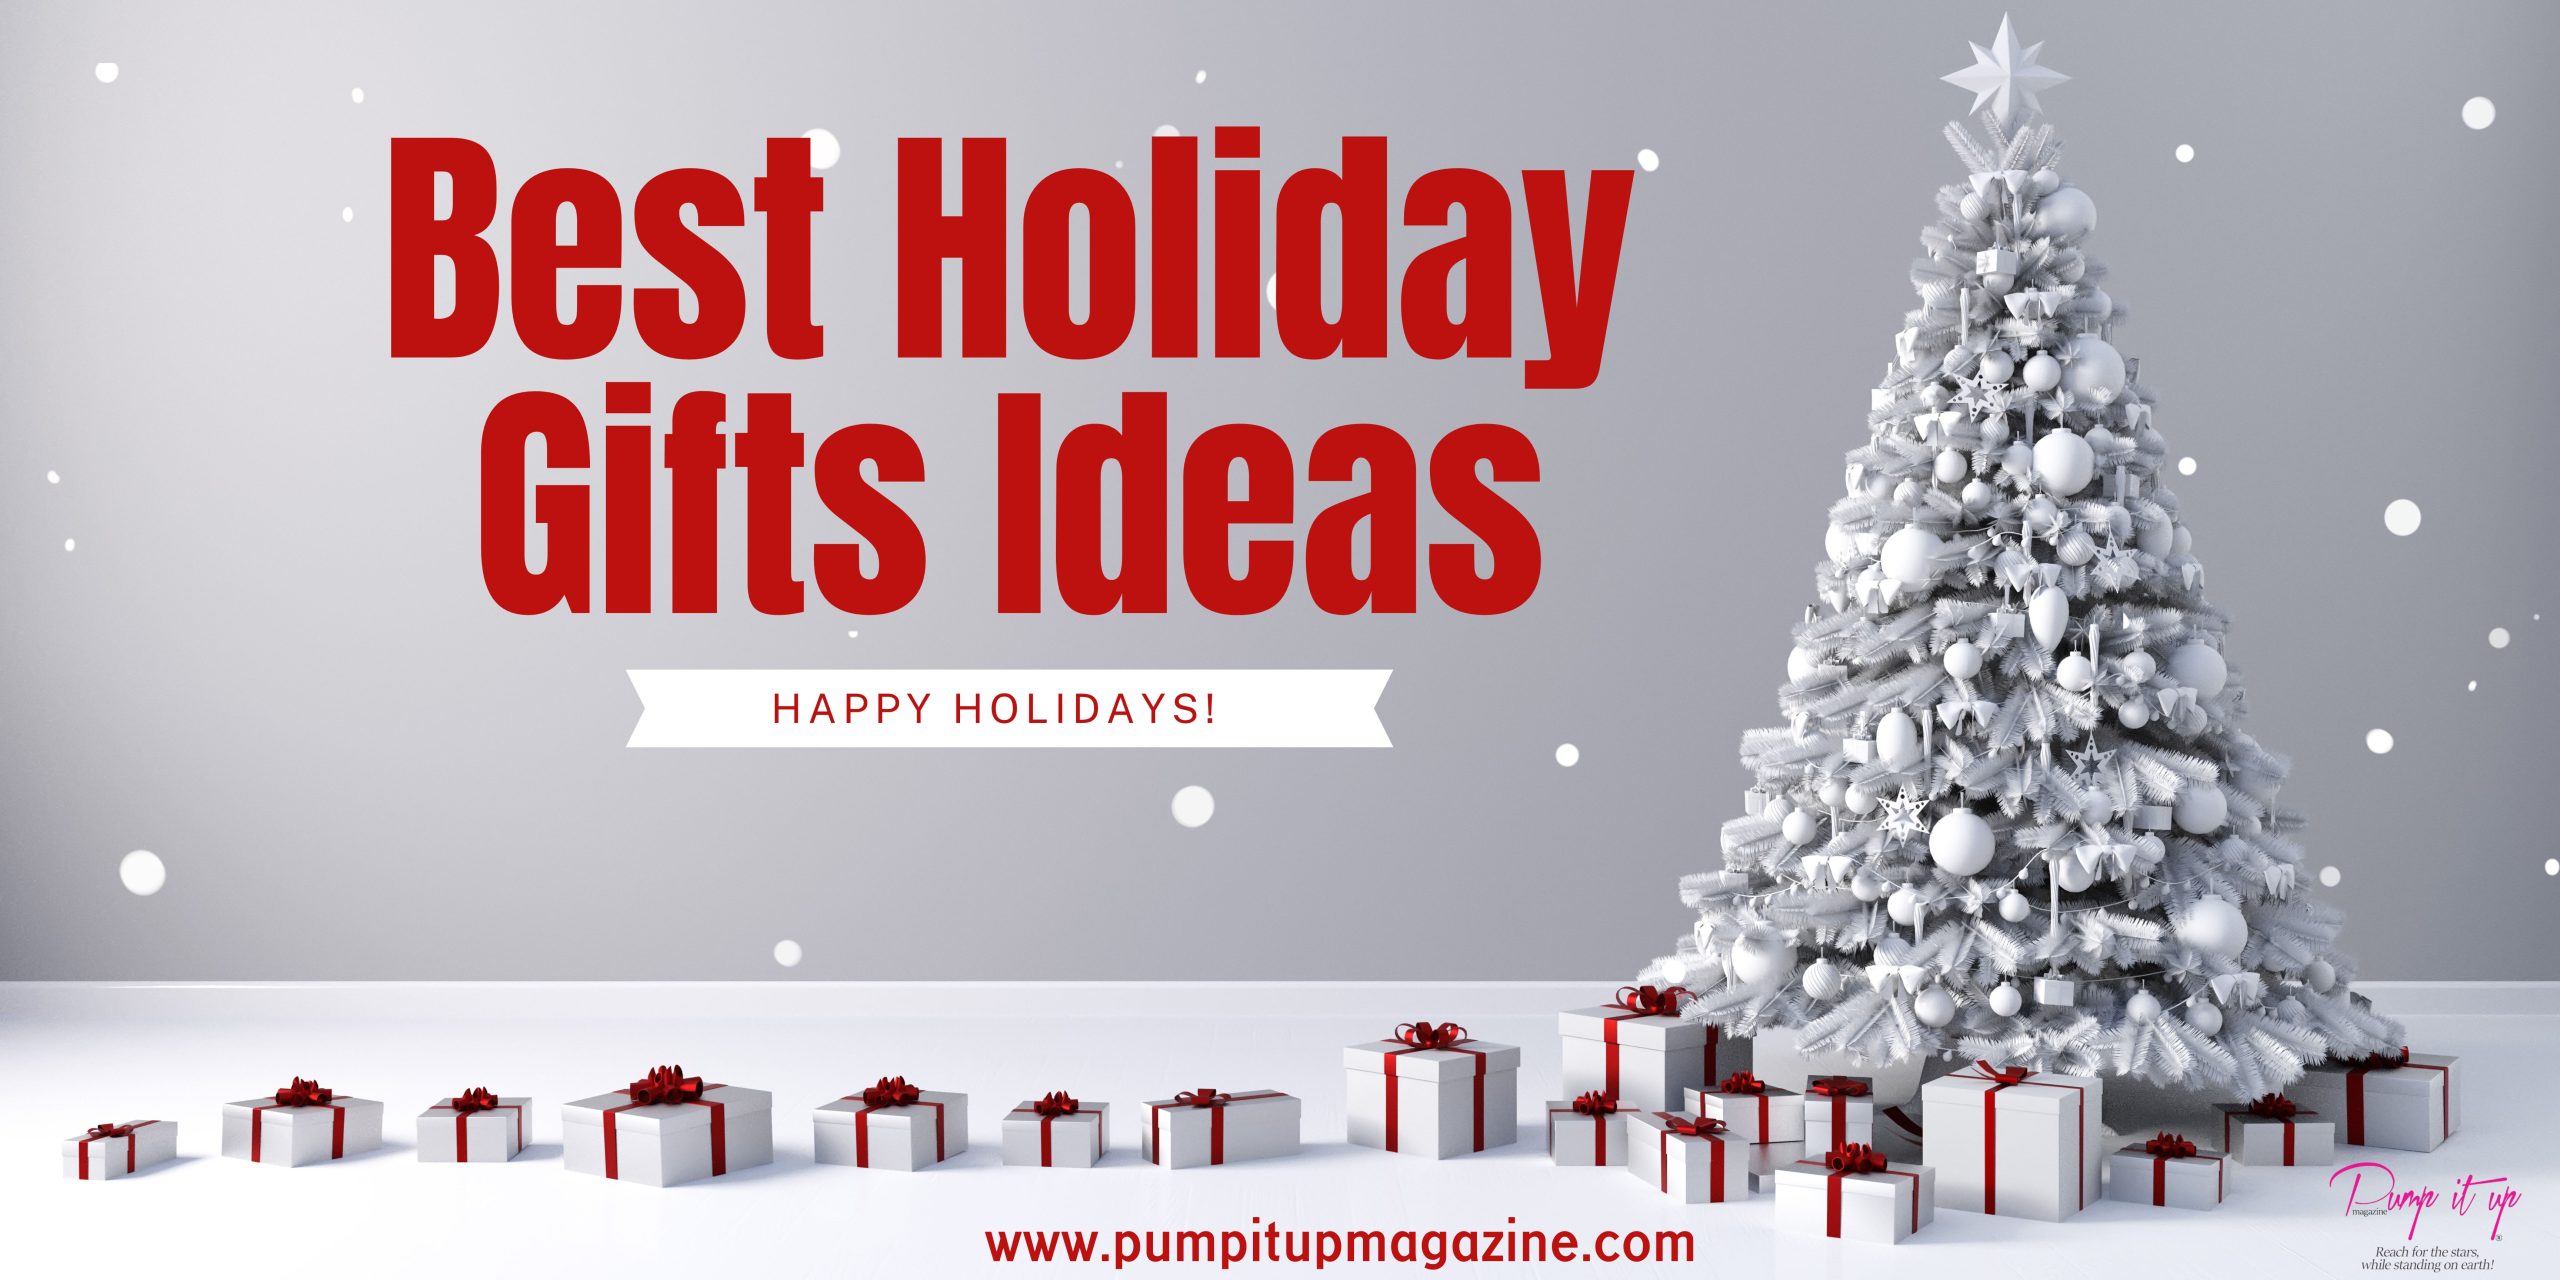 Best Holiday Gifts Ideas